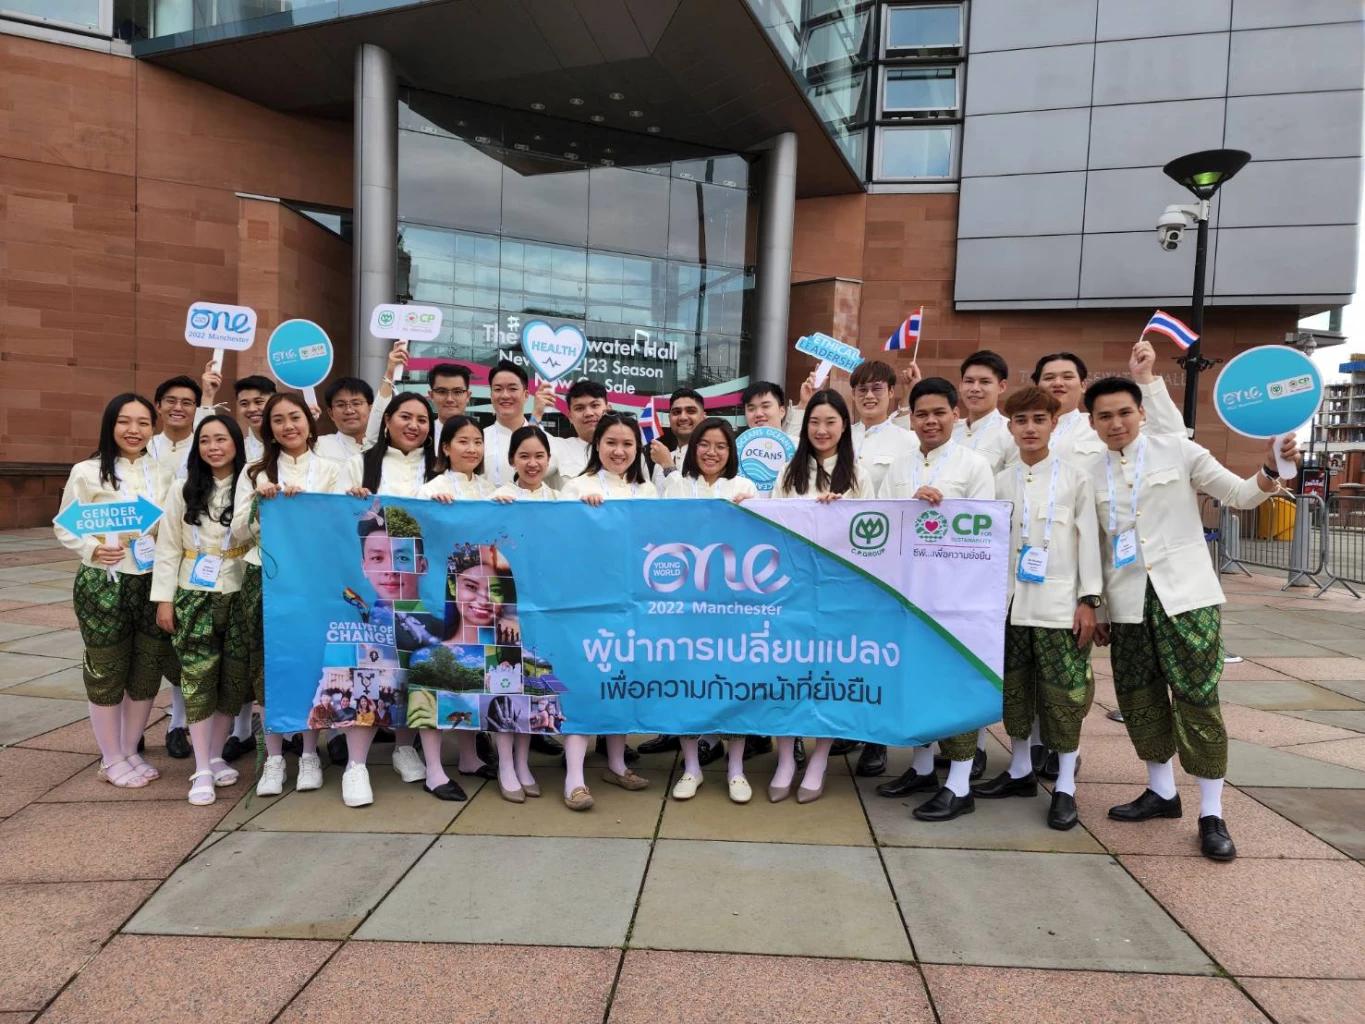 C.P. Group supports Thai youths on a global platform “One Young World” for 7th consecutive year in Manchester, United Kingdom